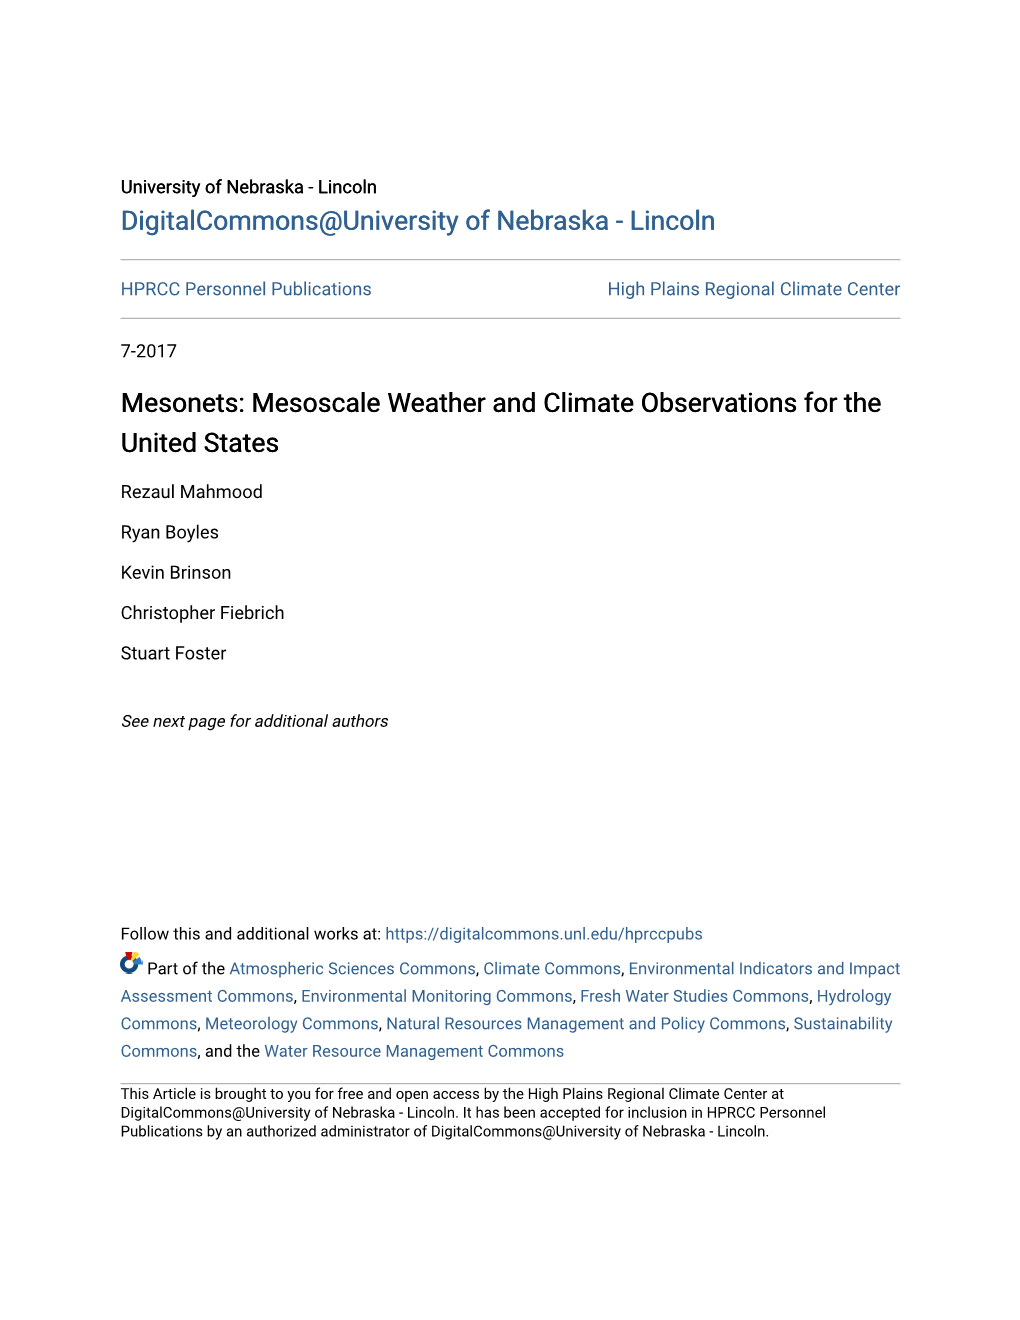 Mesonets: Mesoscale Weather and Climate Observations for the United States